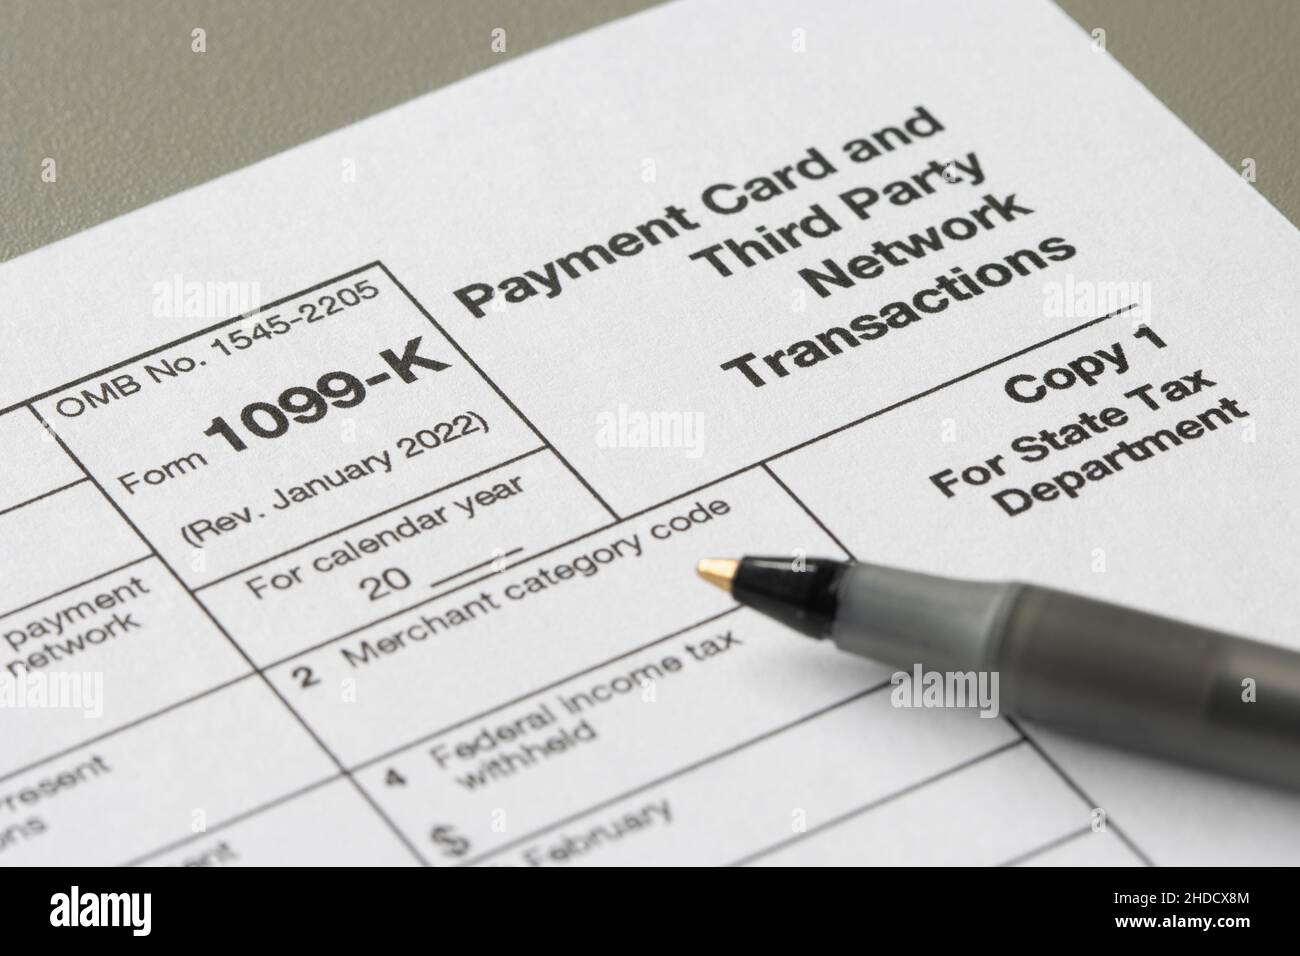 Closeup of Form 1099-K, Payment Card and Third Party Network Transactions, an IRS information return used to report certain payment transactions. Stock Photo